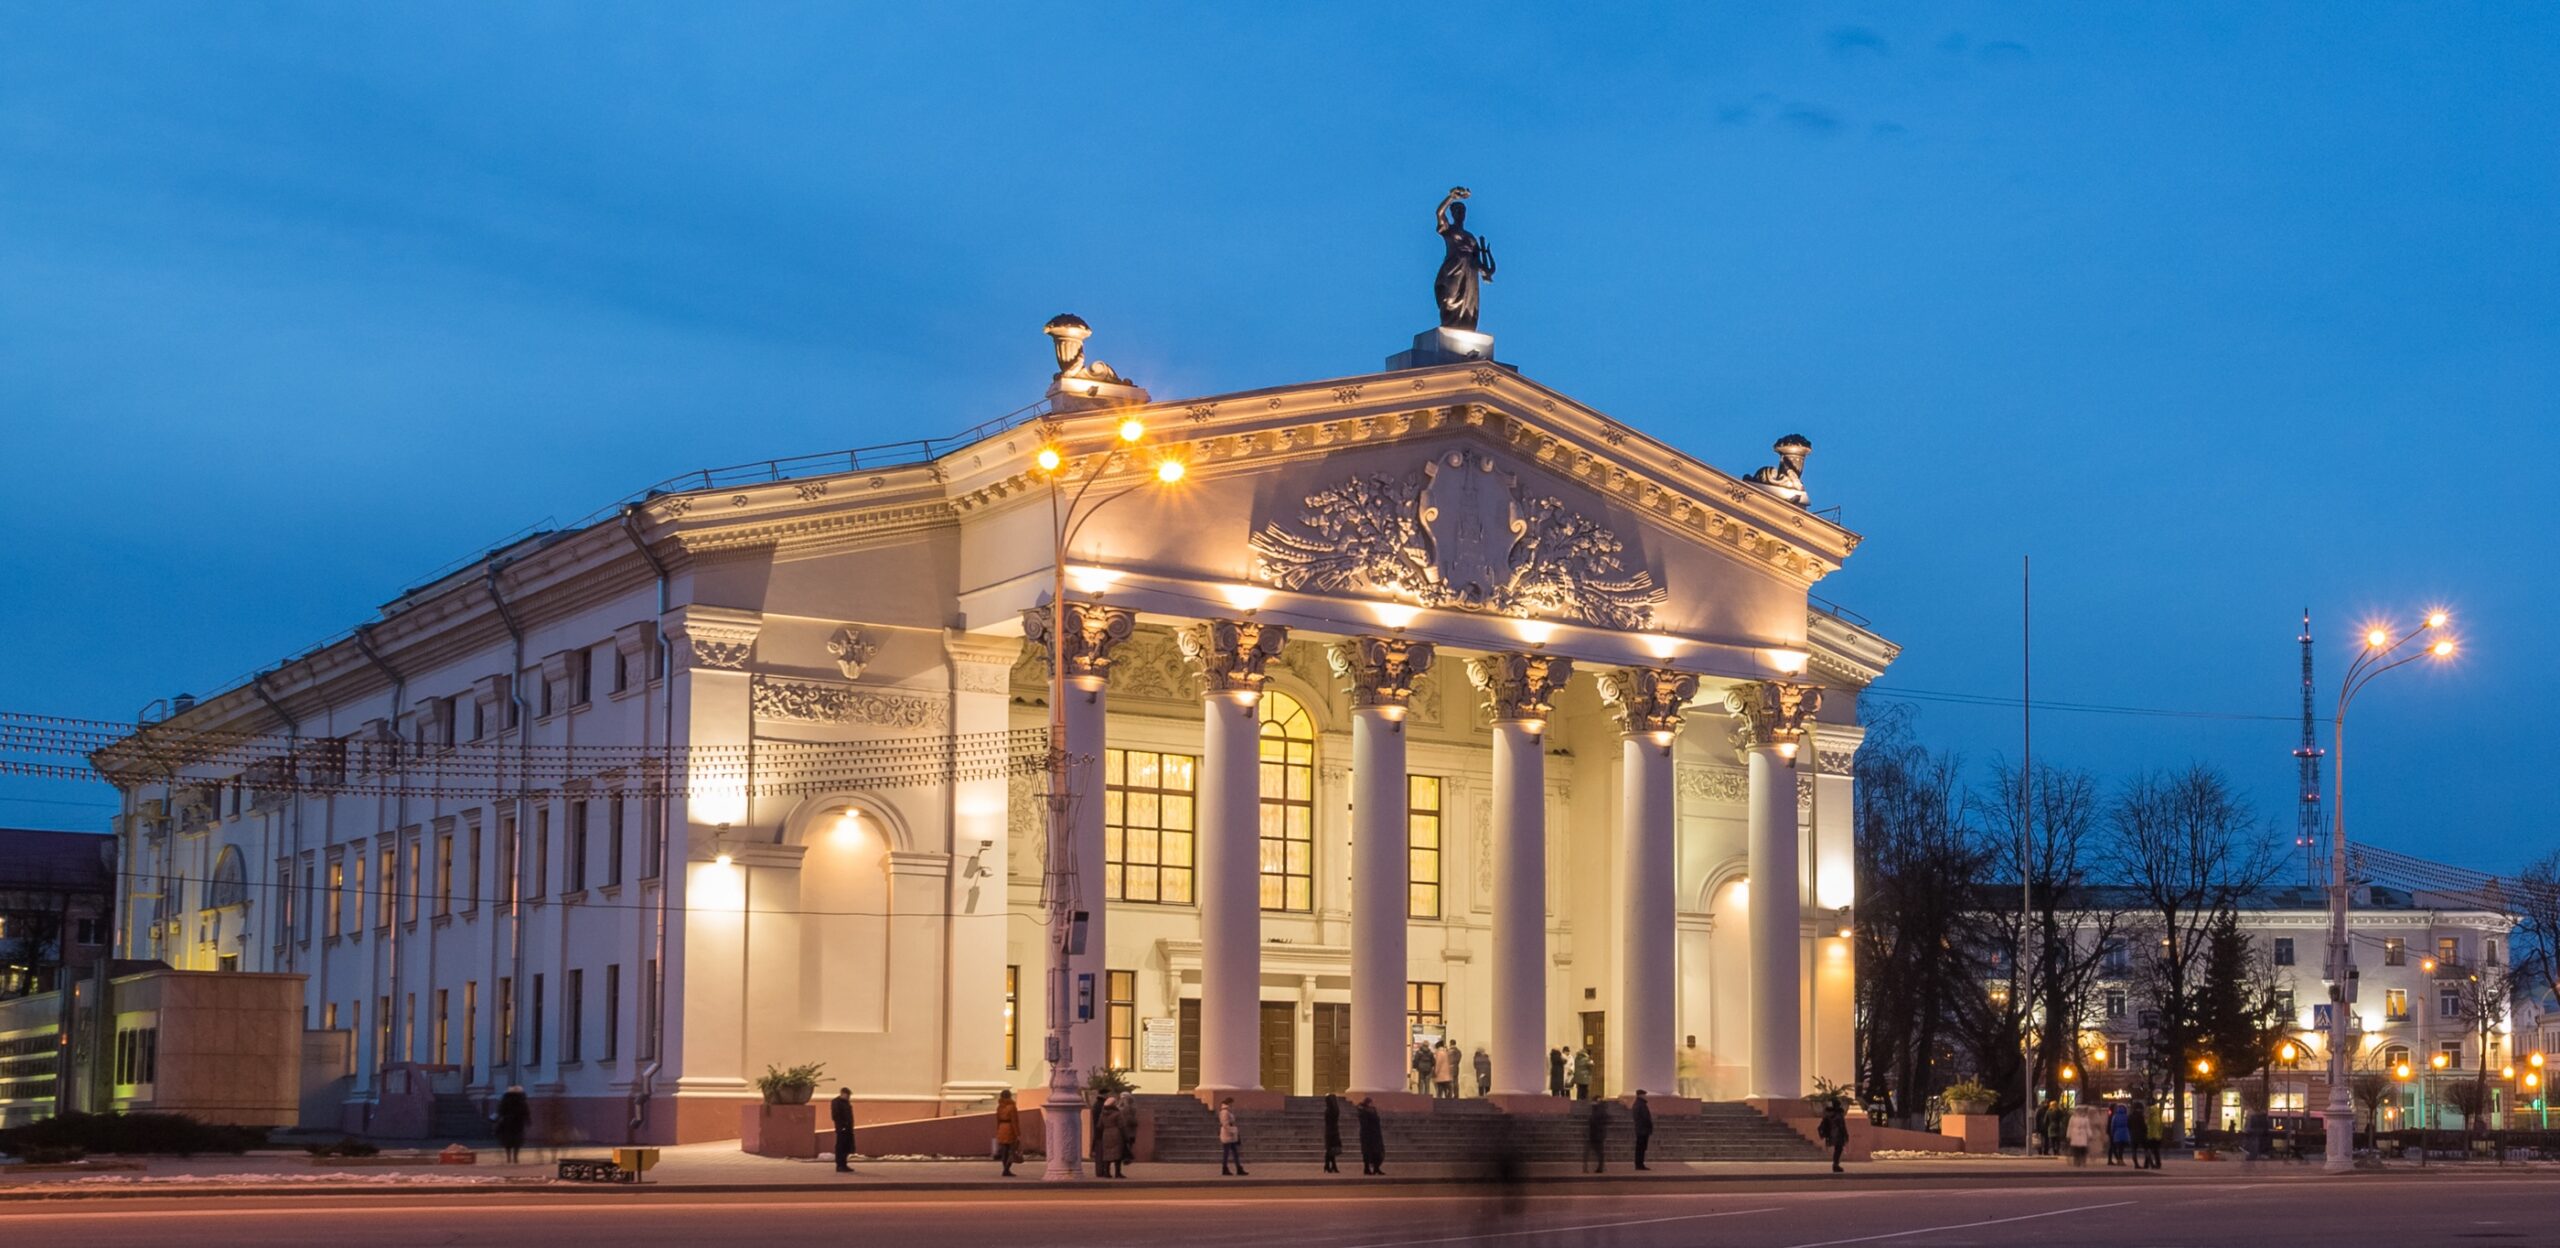 Map of Gomel in night light and views of the Regional Drama Theatre. Lenin Square